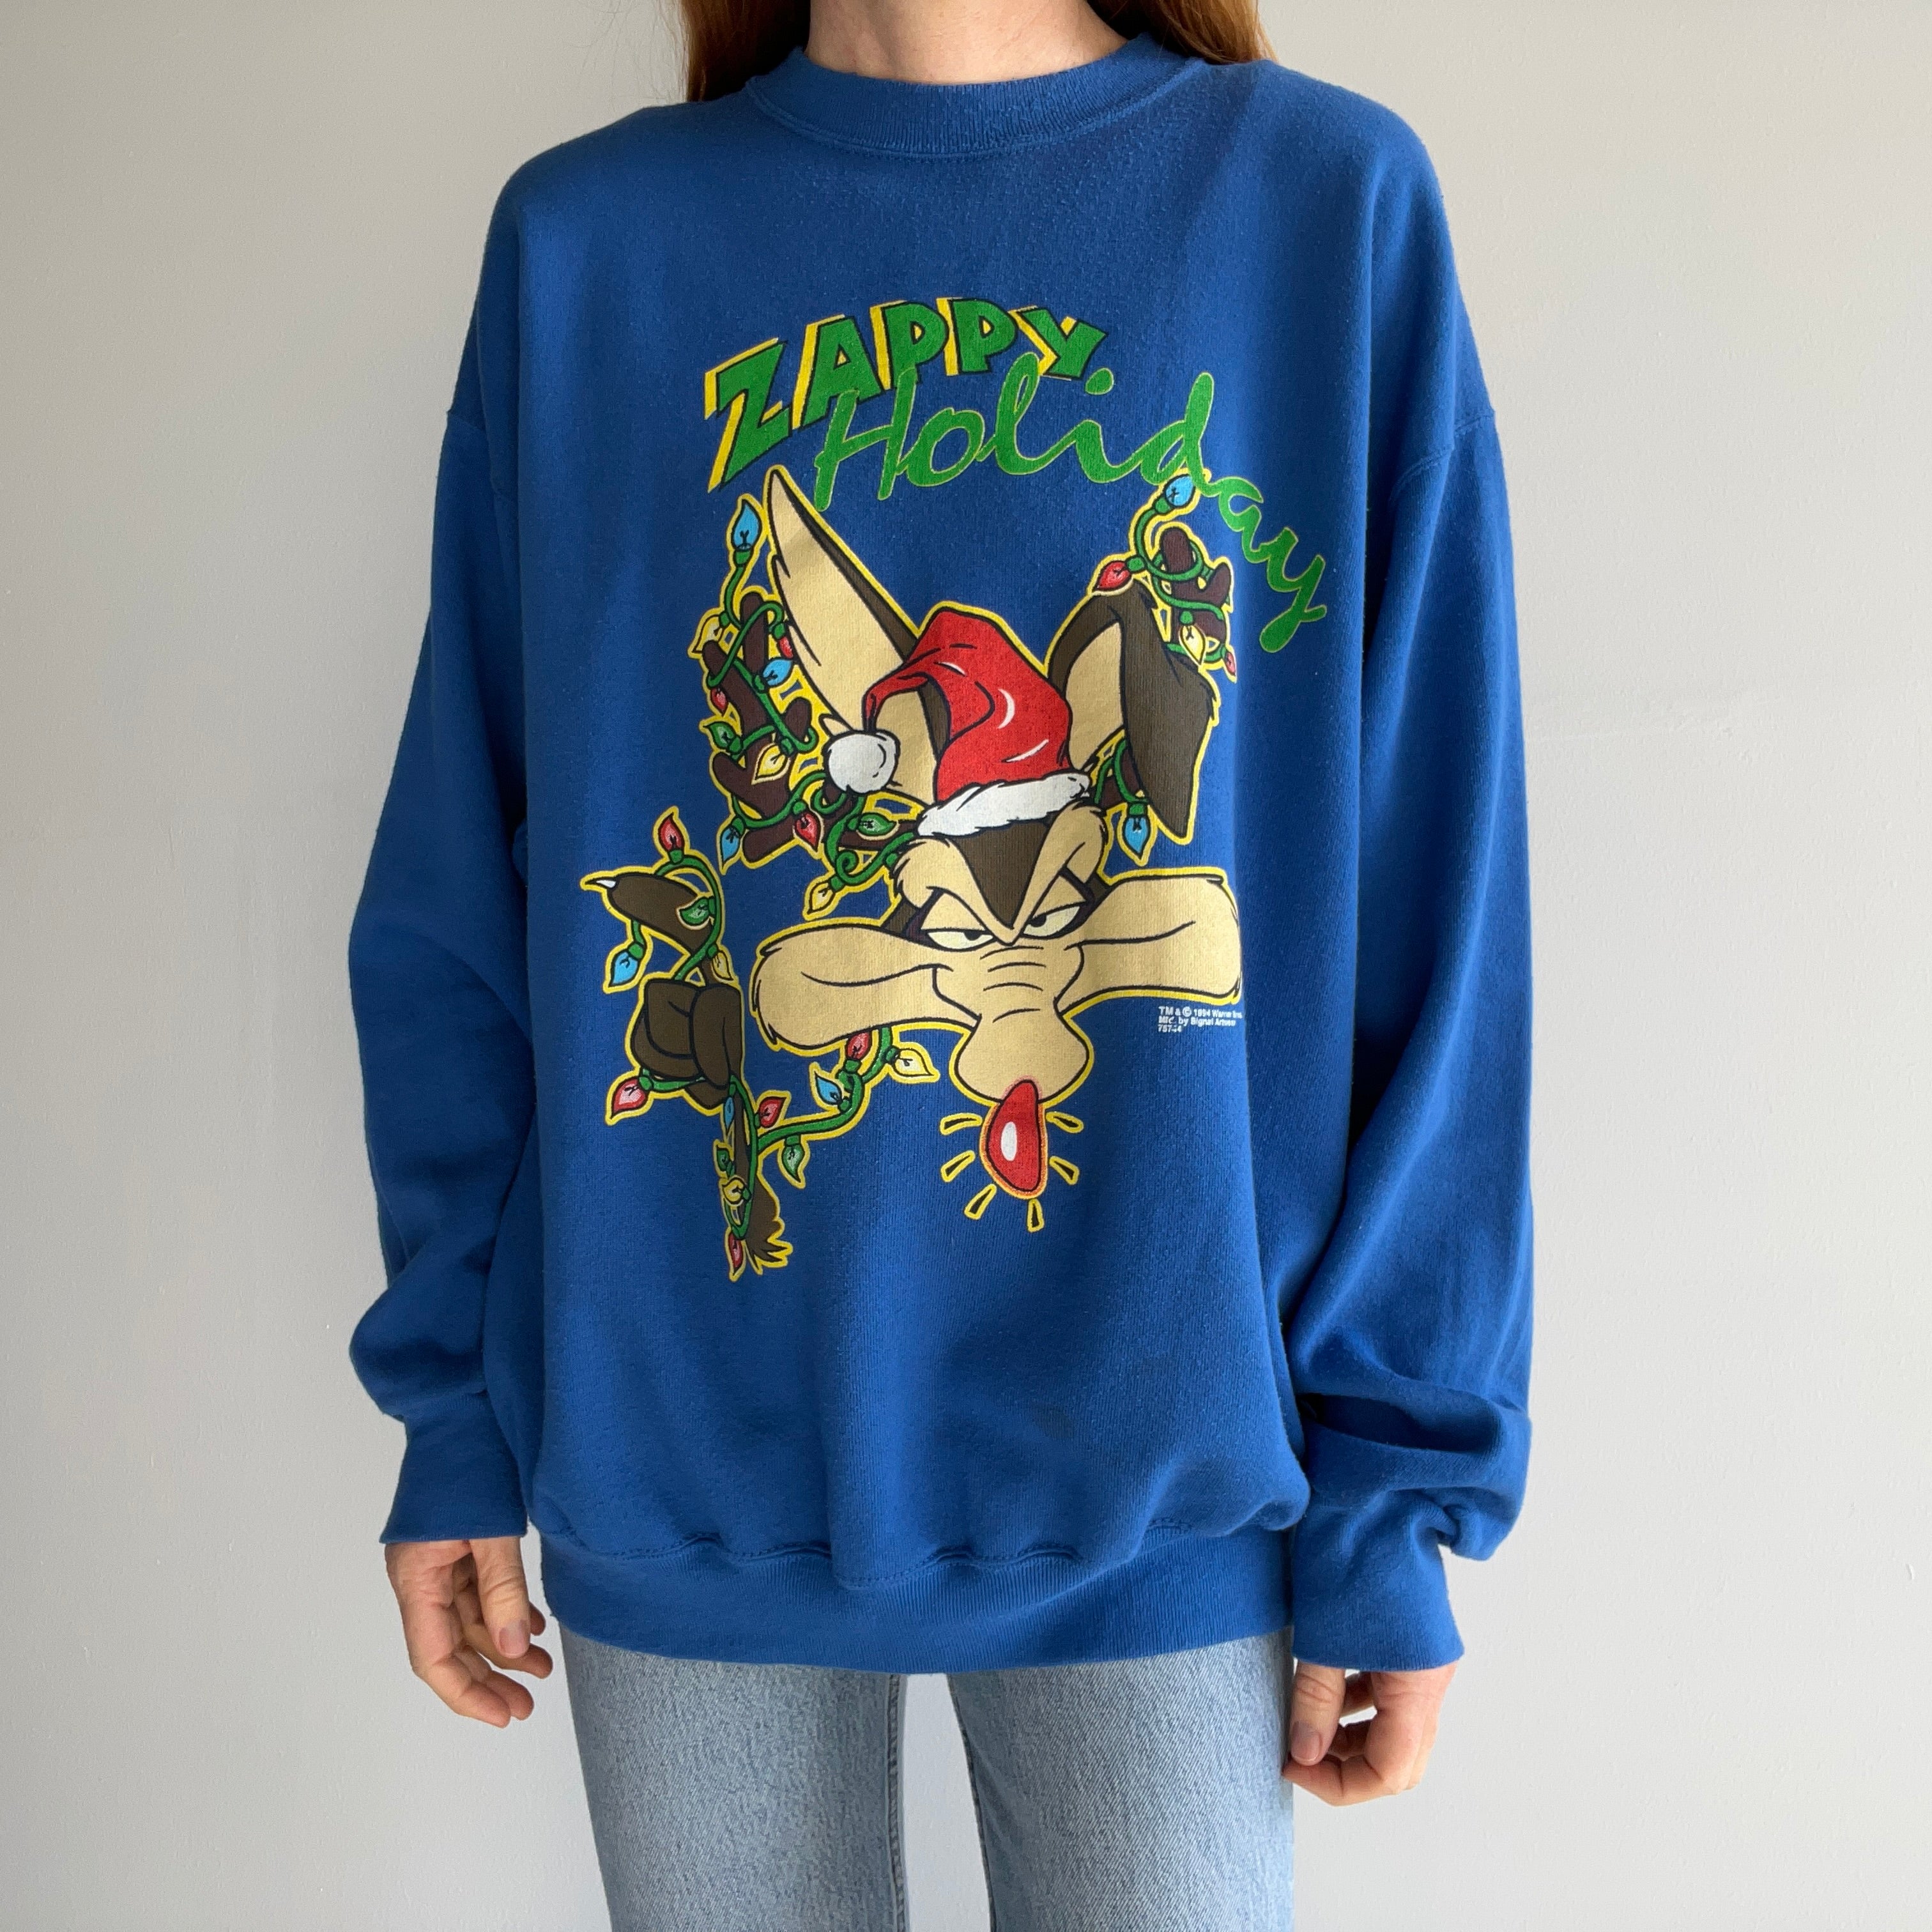 1994 Zappy Holidays by Wile E Coyote